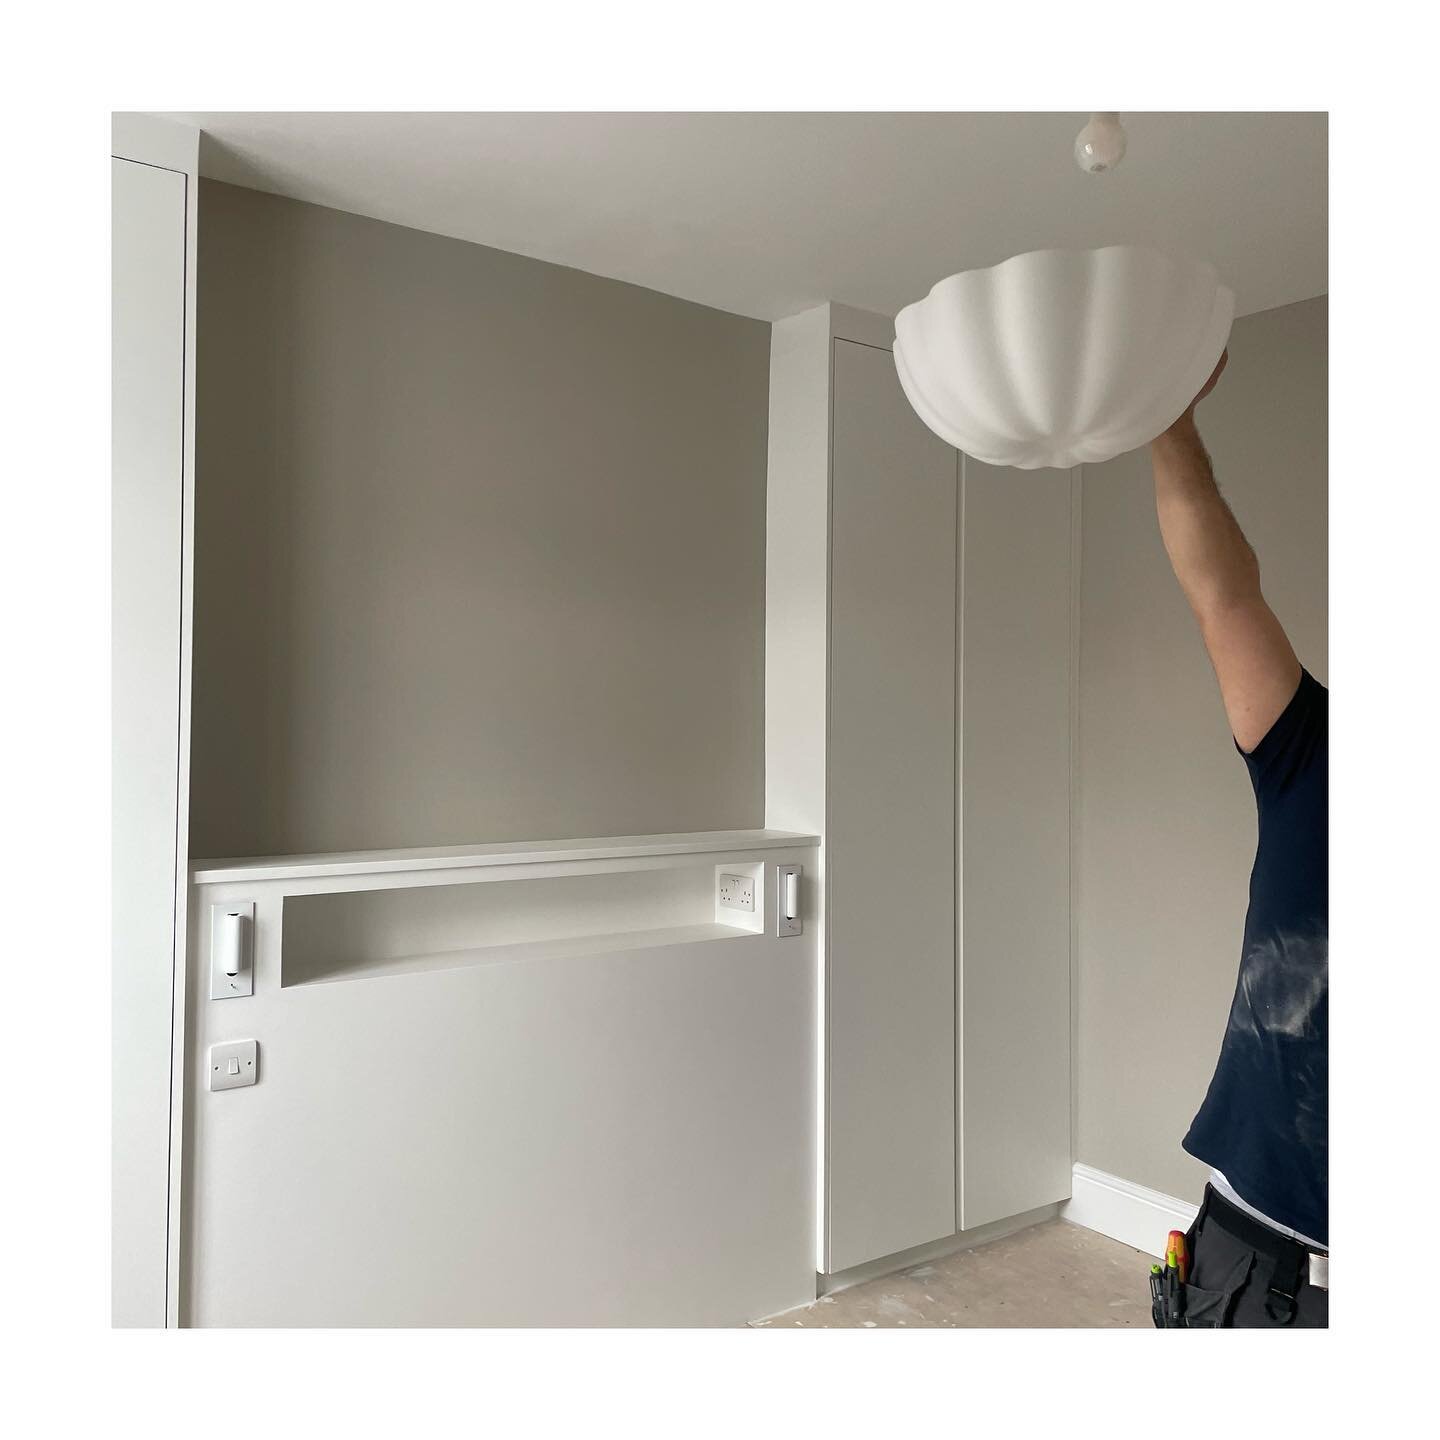 Full scale mock-up of lighting on site. Fun and softness to compliment this practical and crisp bedroom space

 #bedroomlighting #siteprogress #loveconstruction #dontmoveimprove